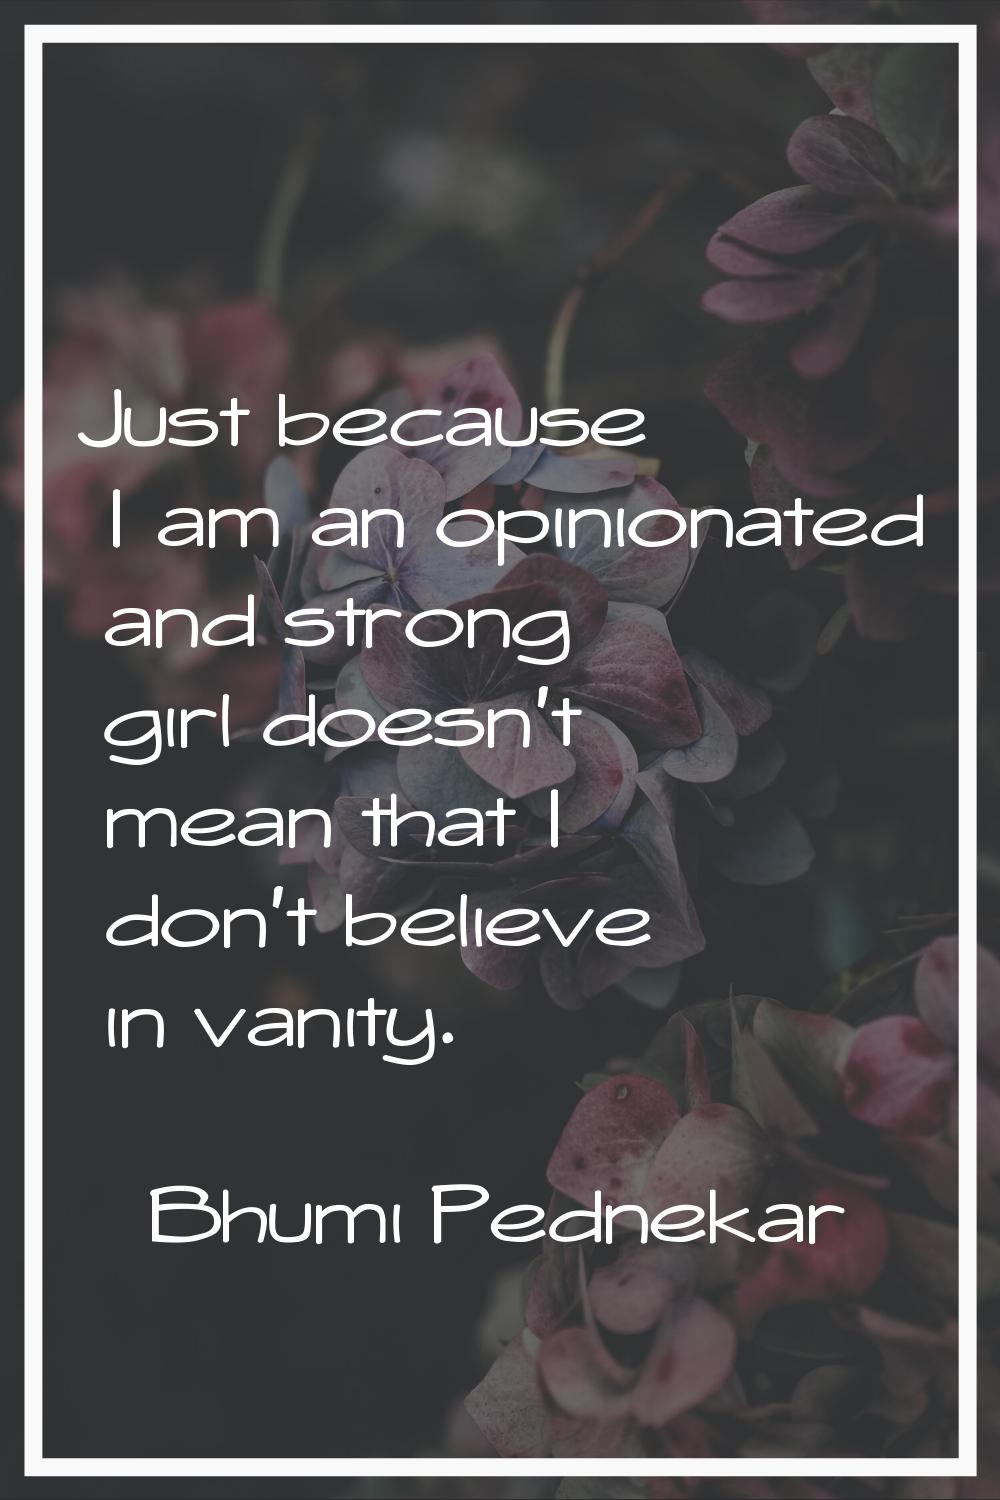 Just because I am an opinionated and strong girl doesn't mean that I don't believe in vanity.